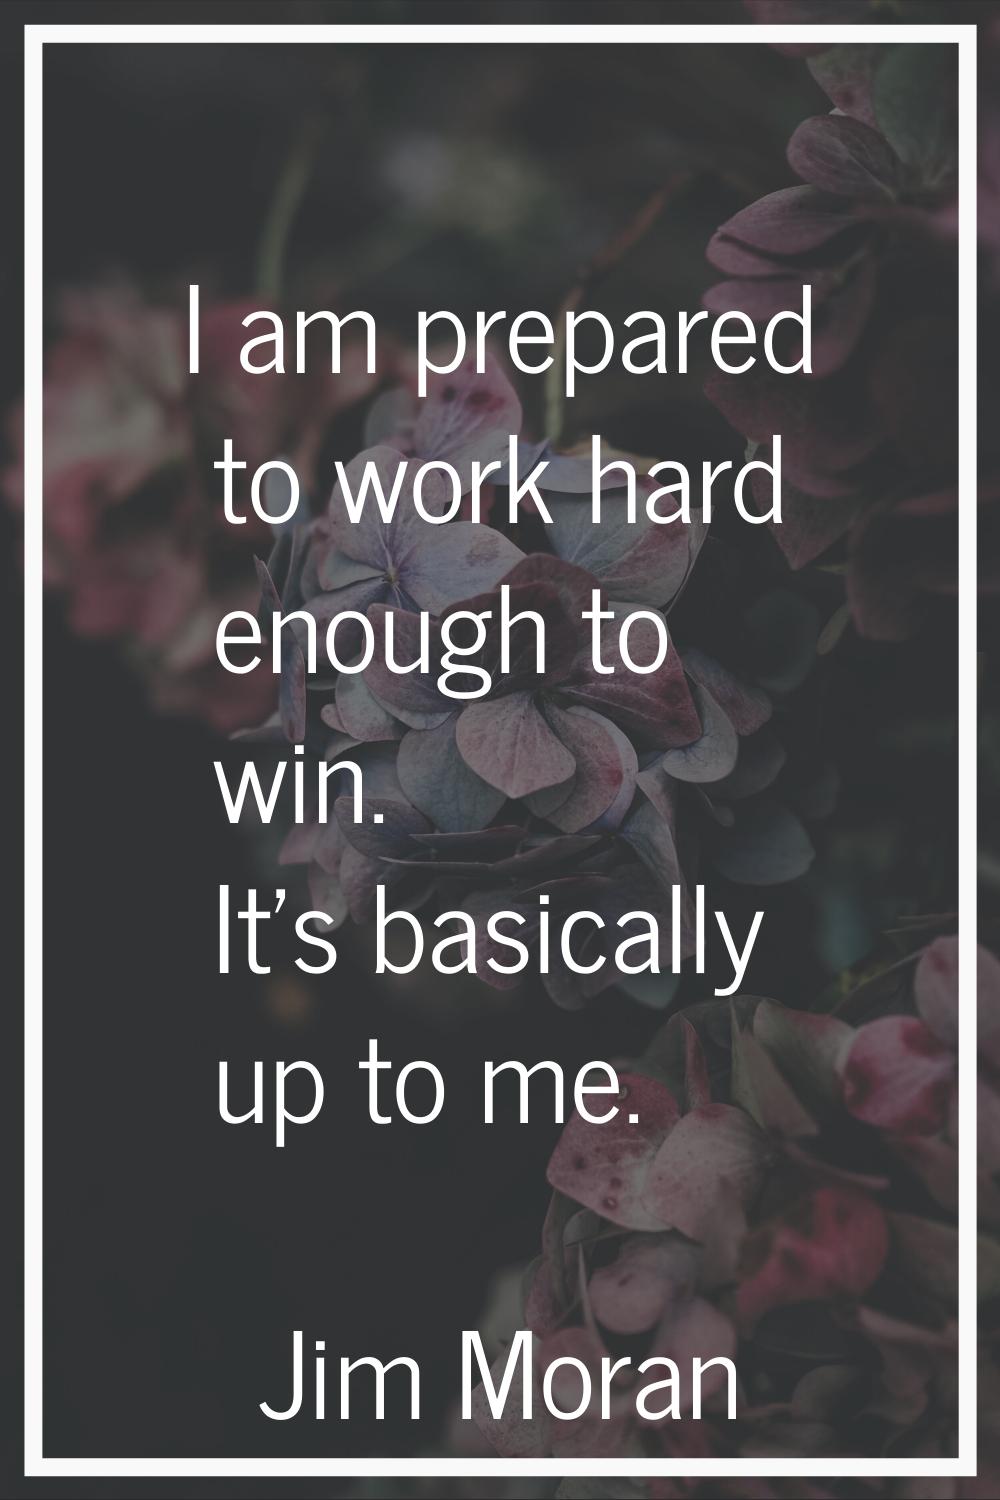 I am prepared to work hard enough to win. It's basically up to me.